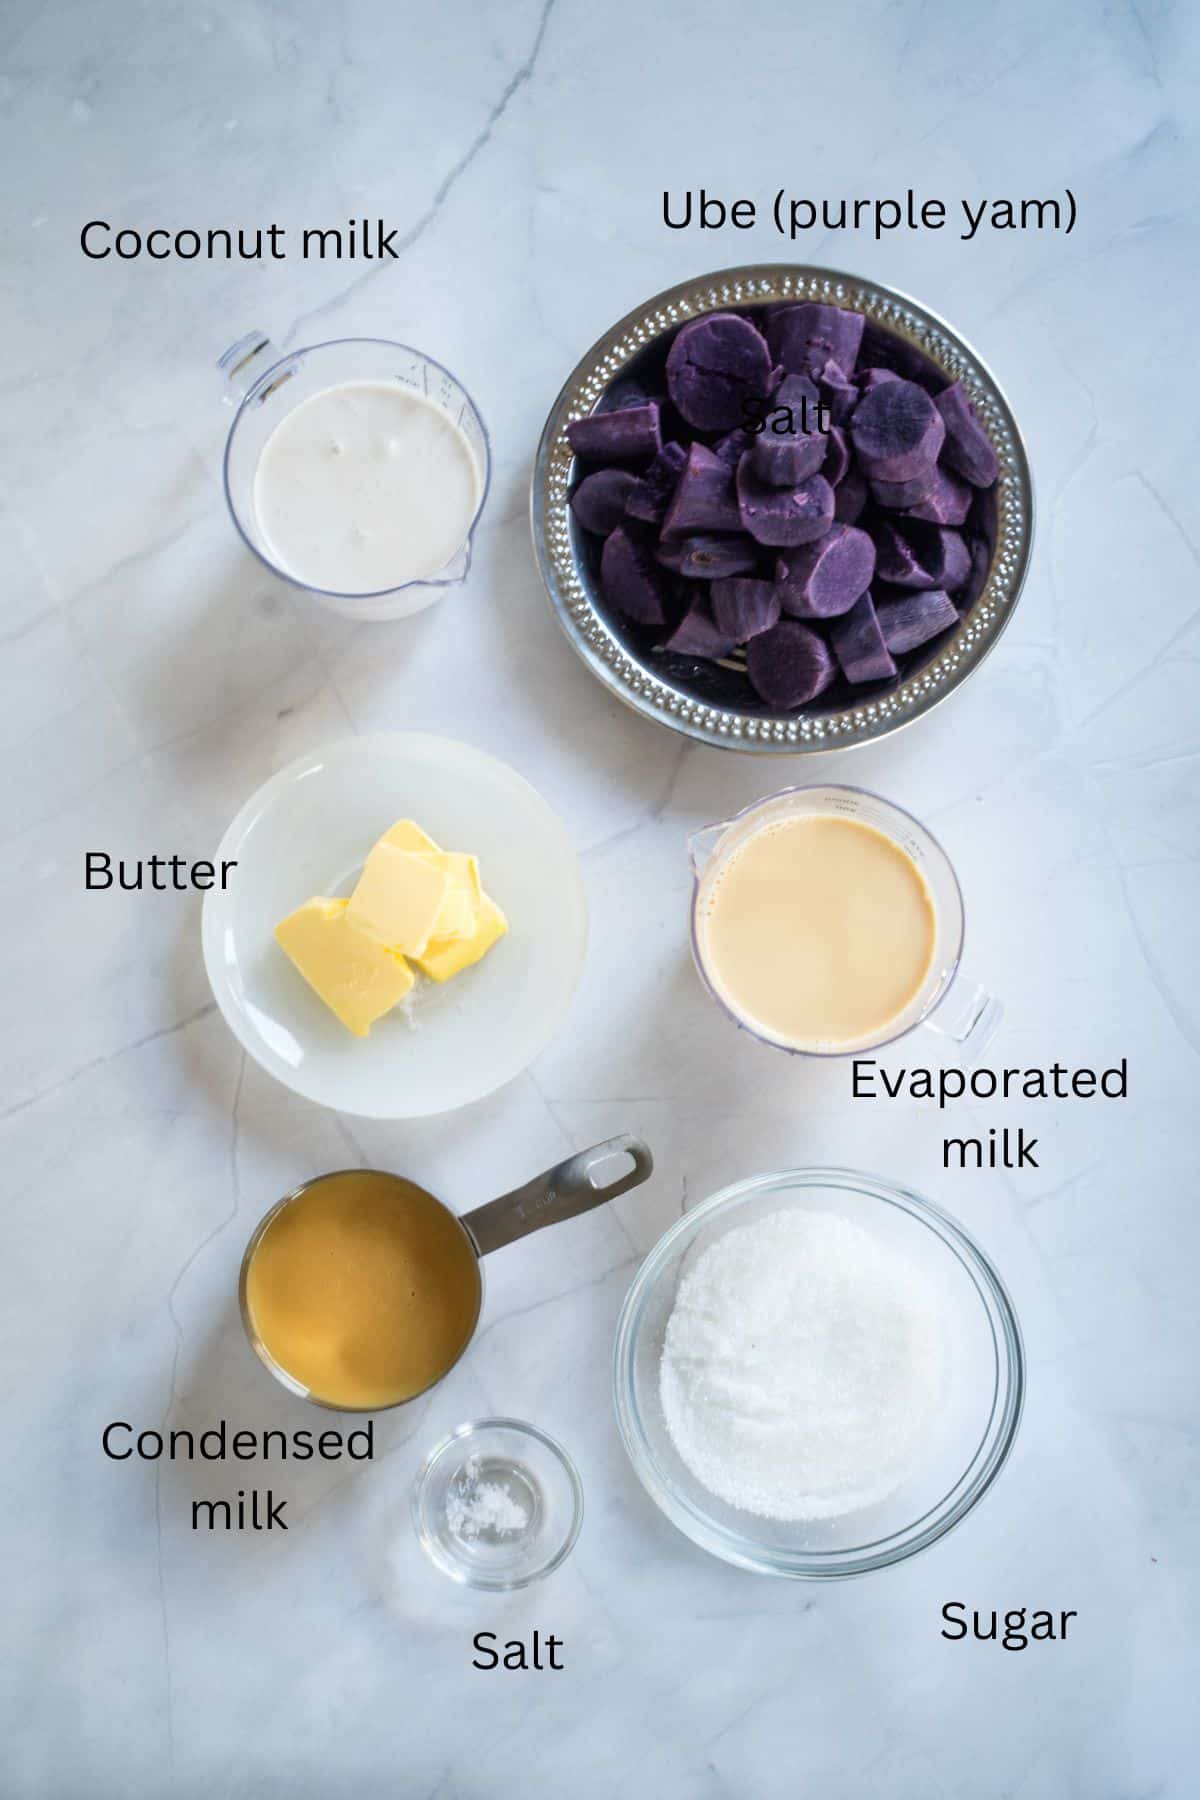 Plates and bowls of ube, coconut milk, butter, evaporated milk, condensed milk, sugar and salt against a marble background.